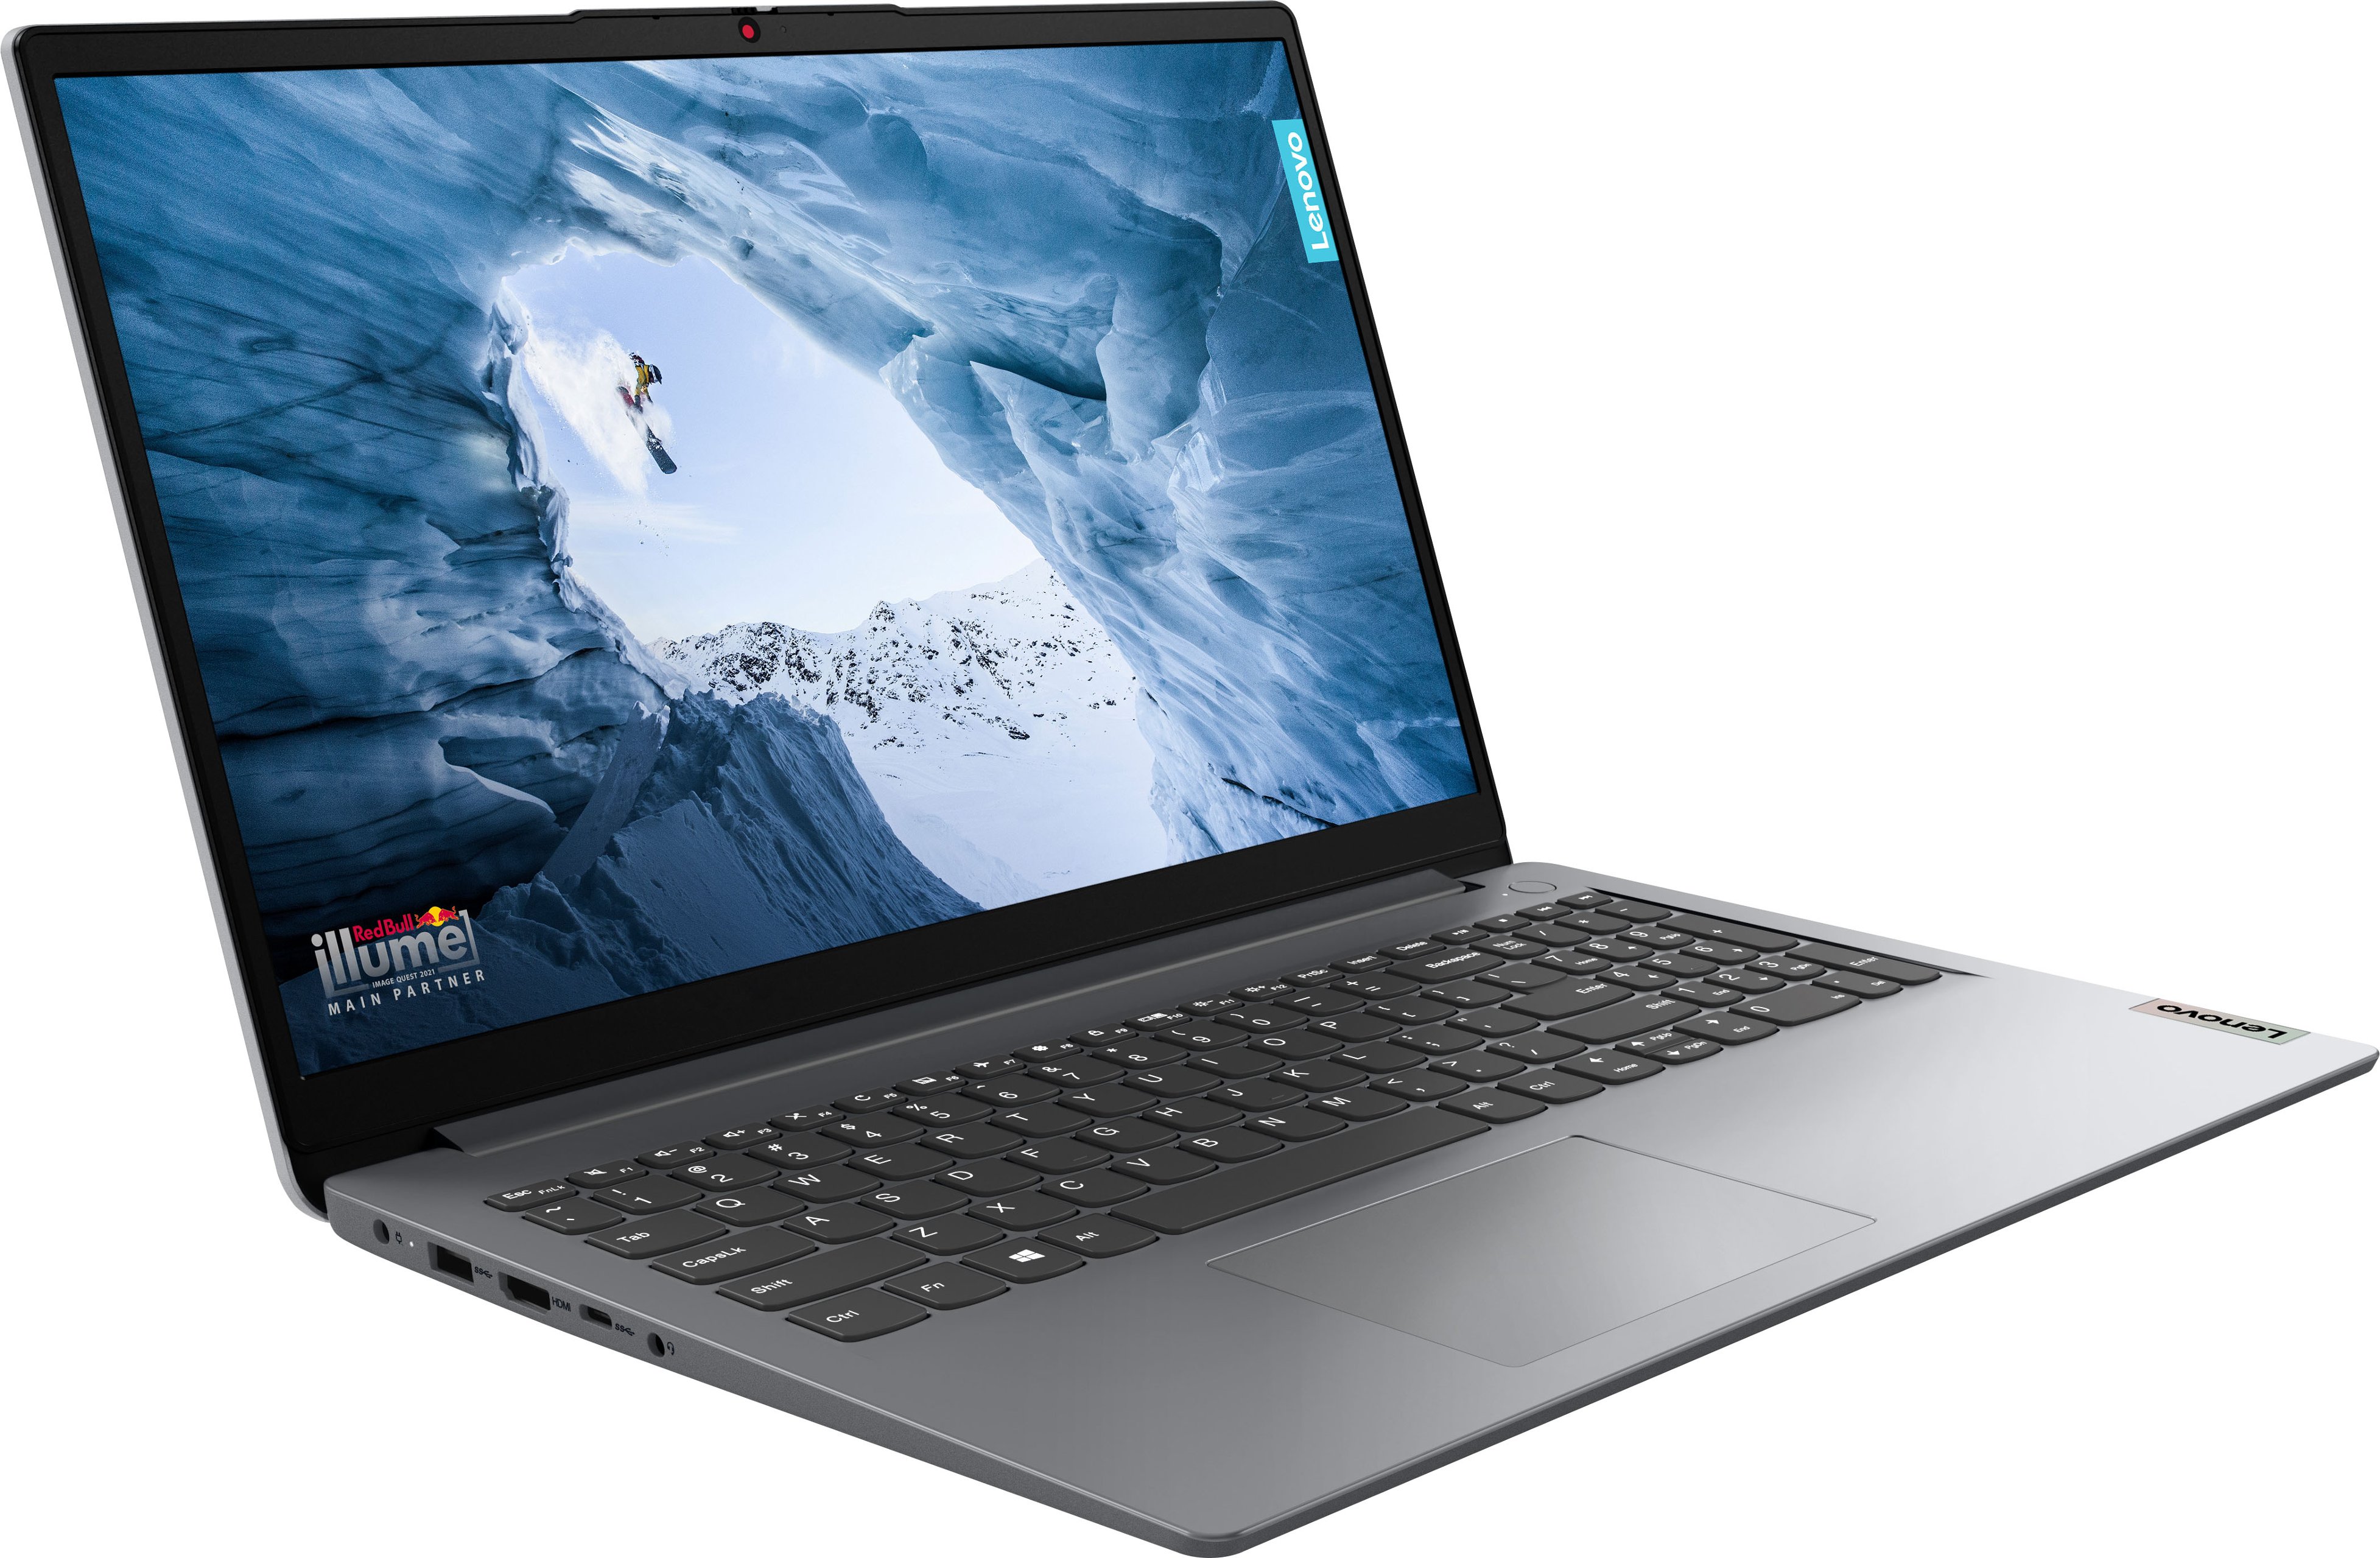 Angle View: Geek Squad Certified Refurbished MacBook Pro 13.3" Laptop - Apple M1 chip - 8GB Memory - 256GB SSD - Space Gray